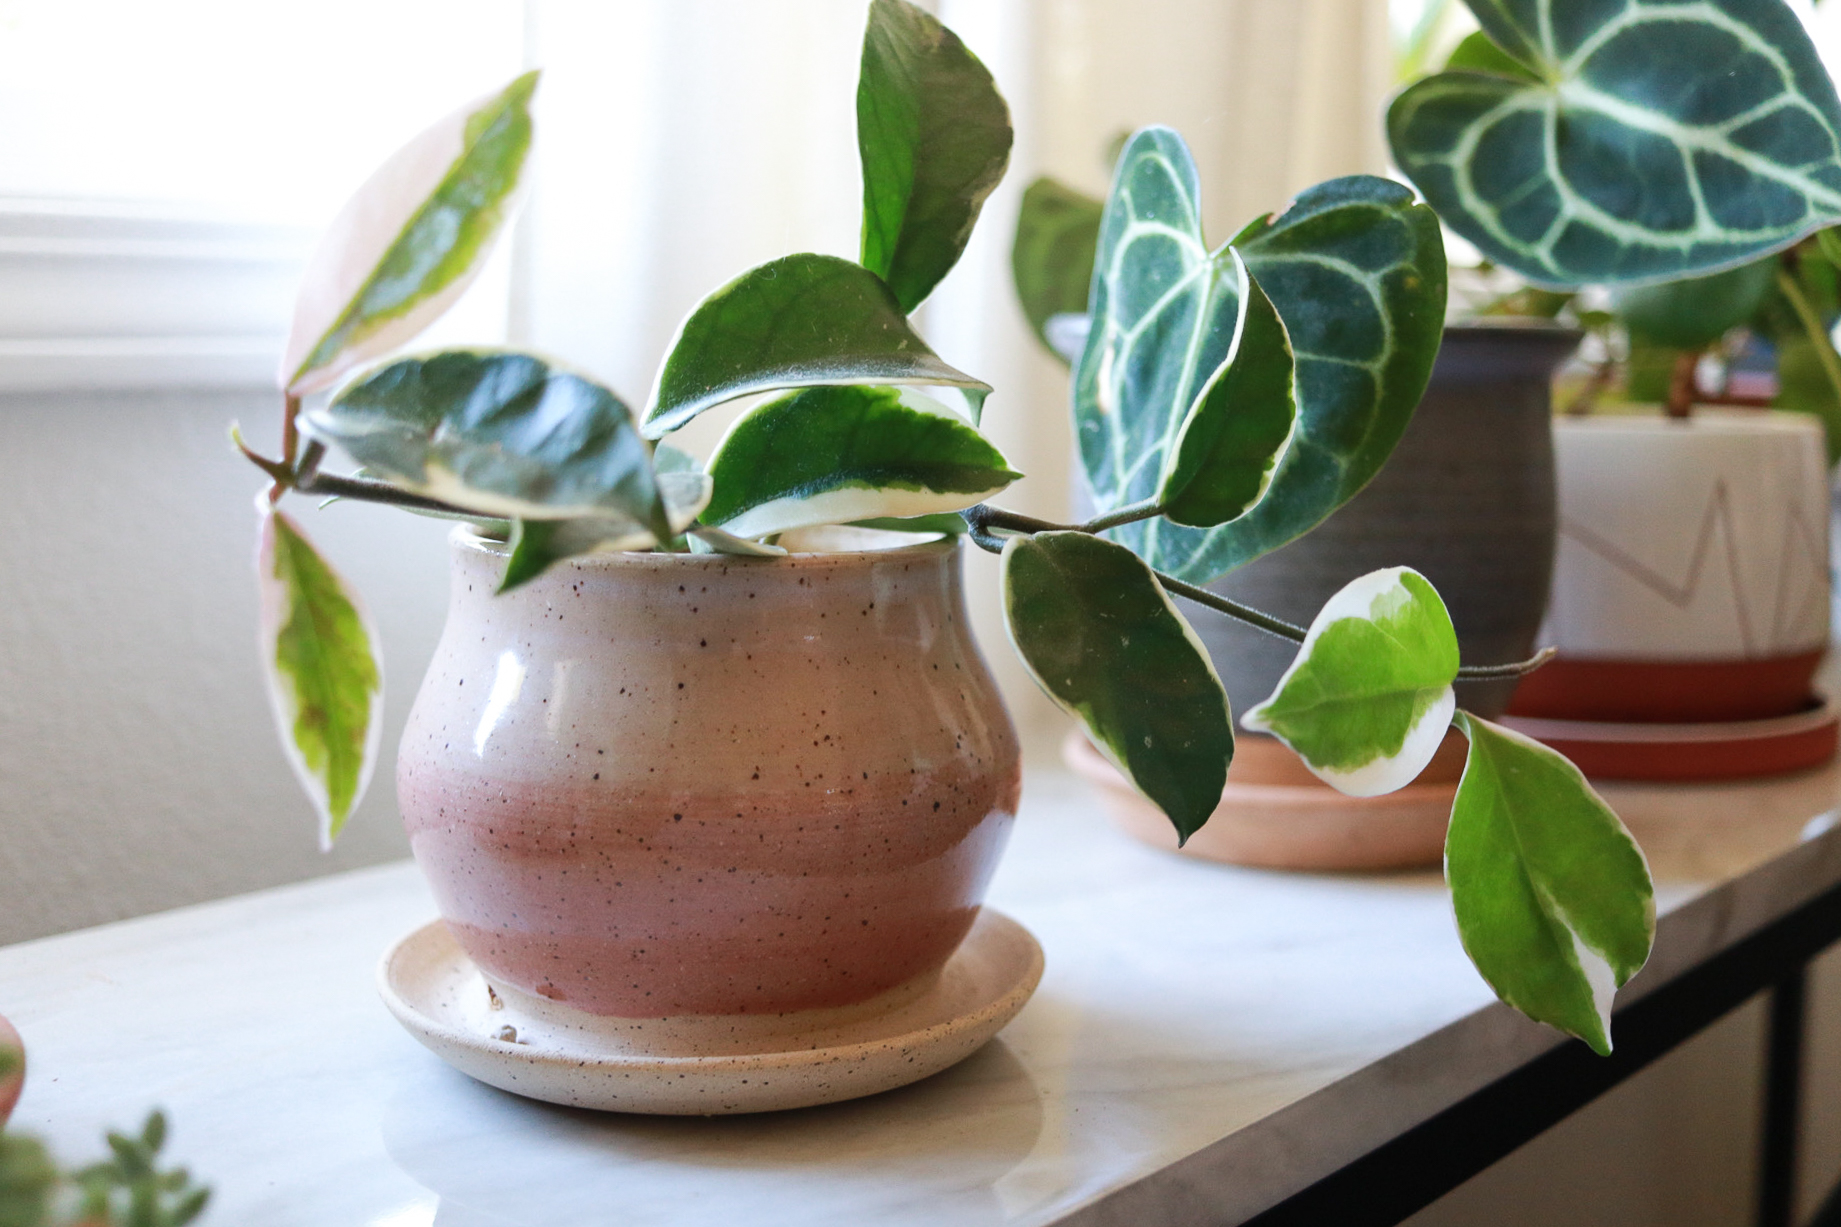 Learn how to care for your Hoya plant. Everything you'll need to know from light, to soil, and how to water. Clever Bloom #hoya #houseplants